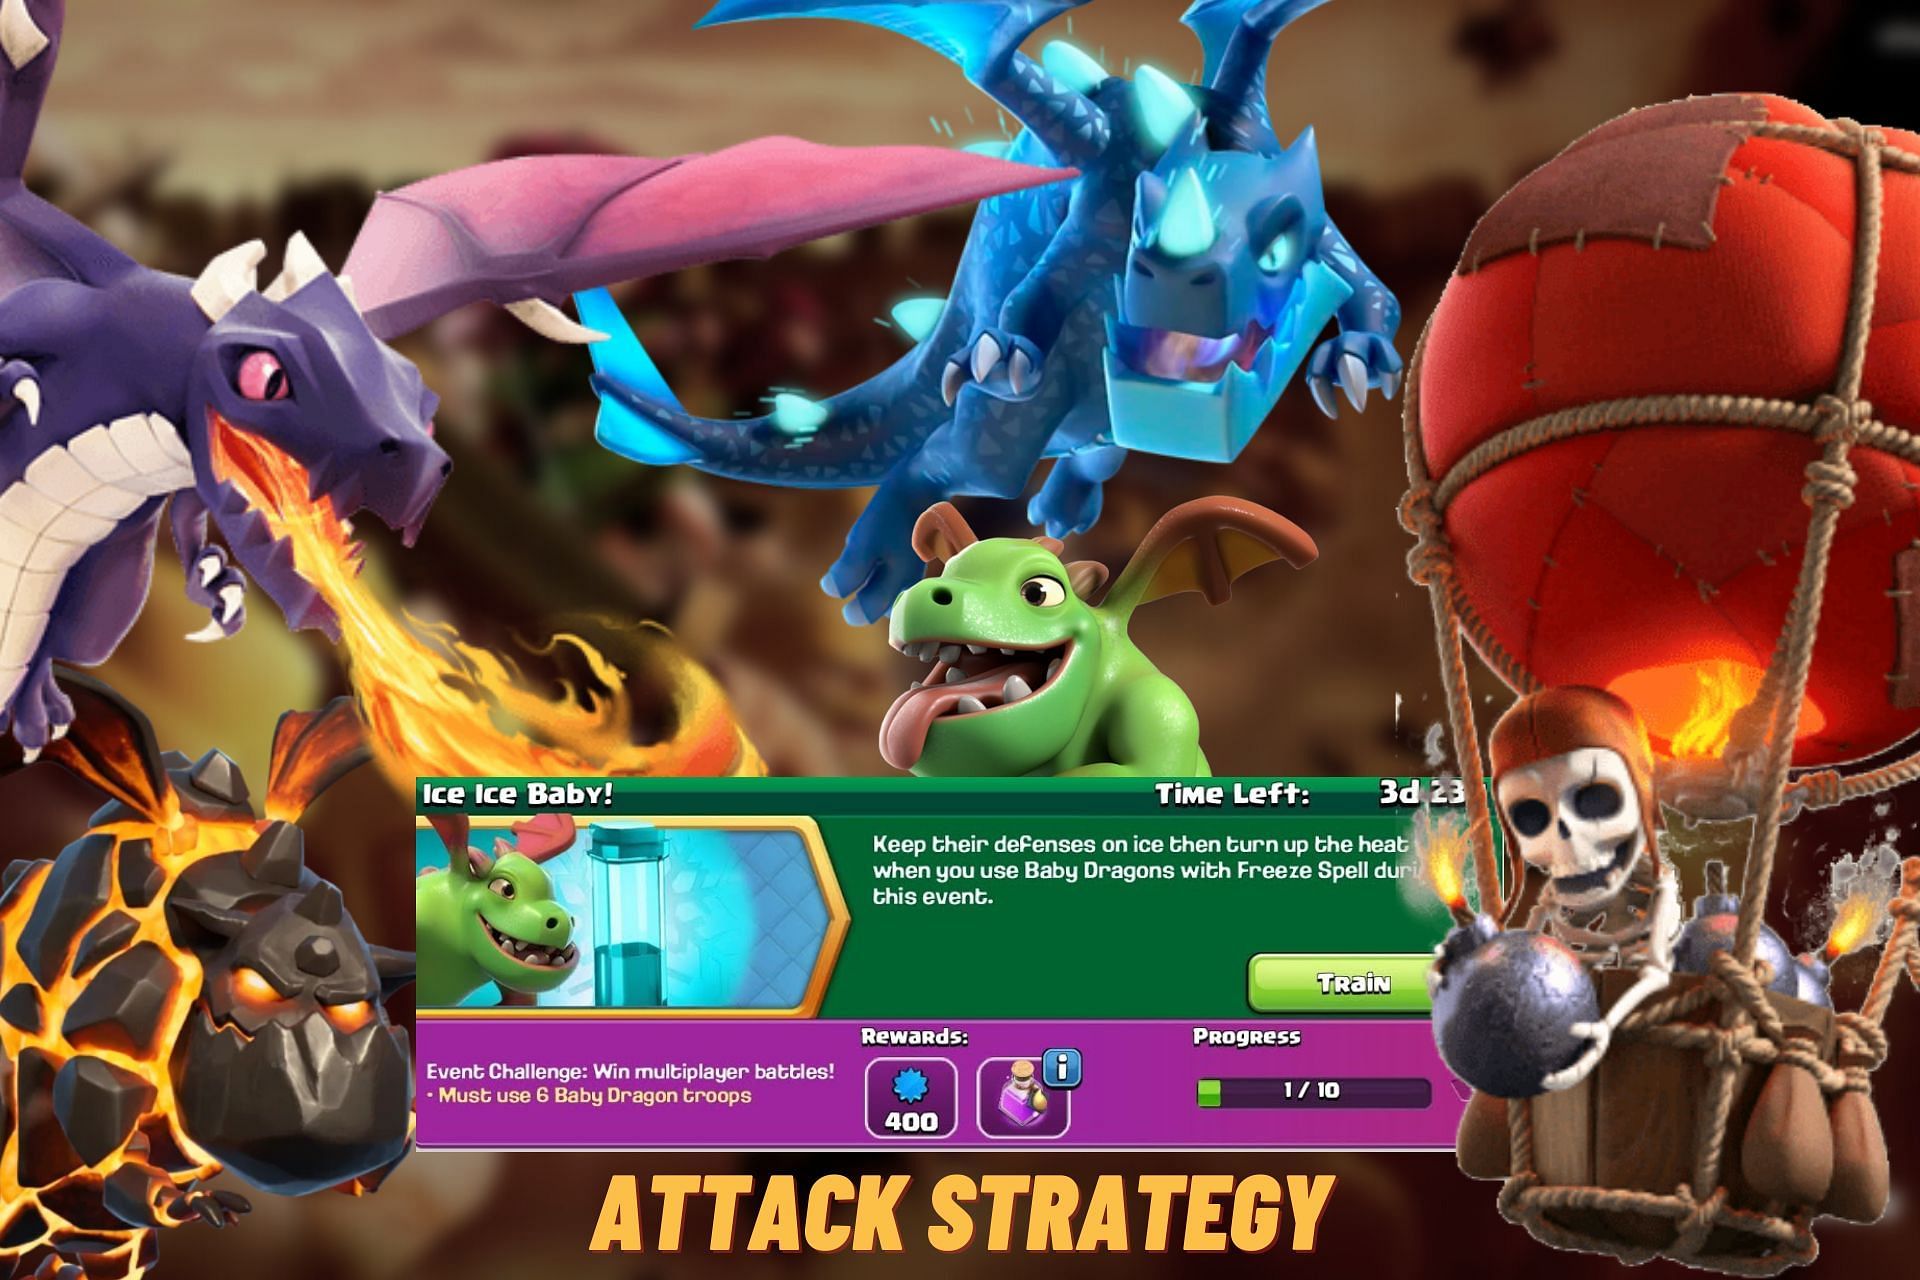 3 Best Air Attack Strategies To Complete The Ice Ice Baby Challenge In Clash Of Clans